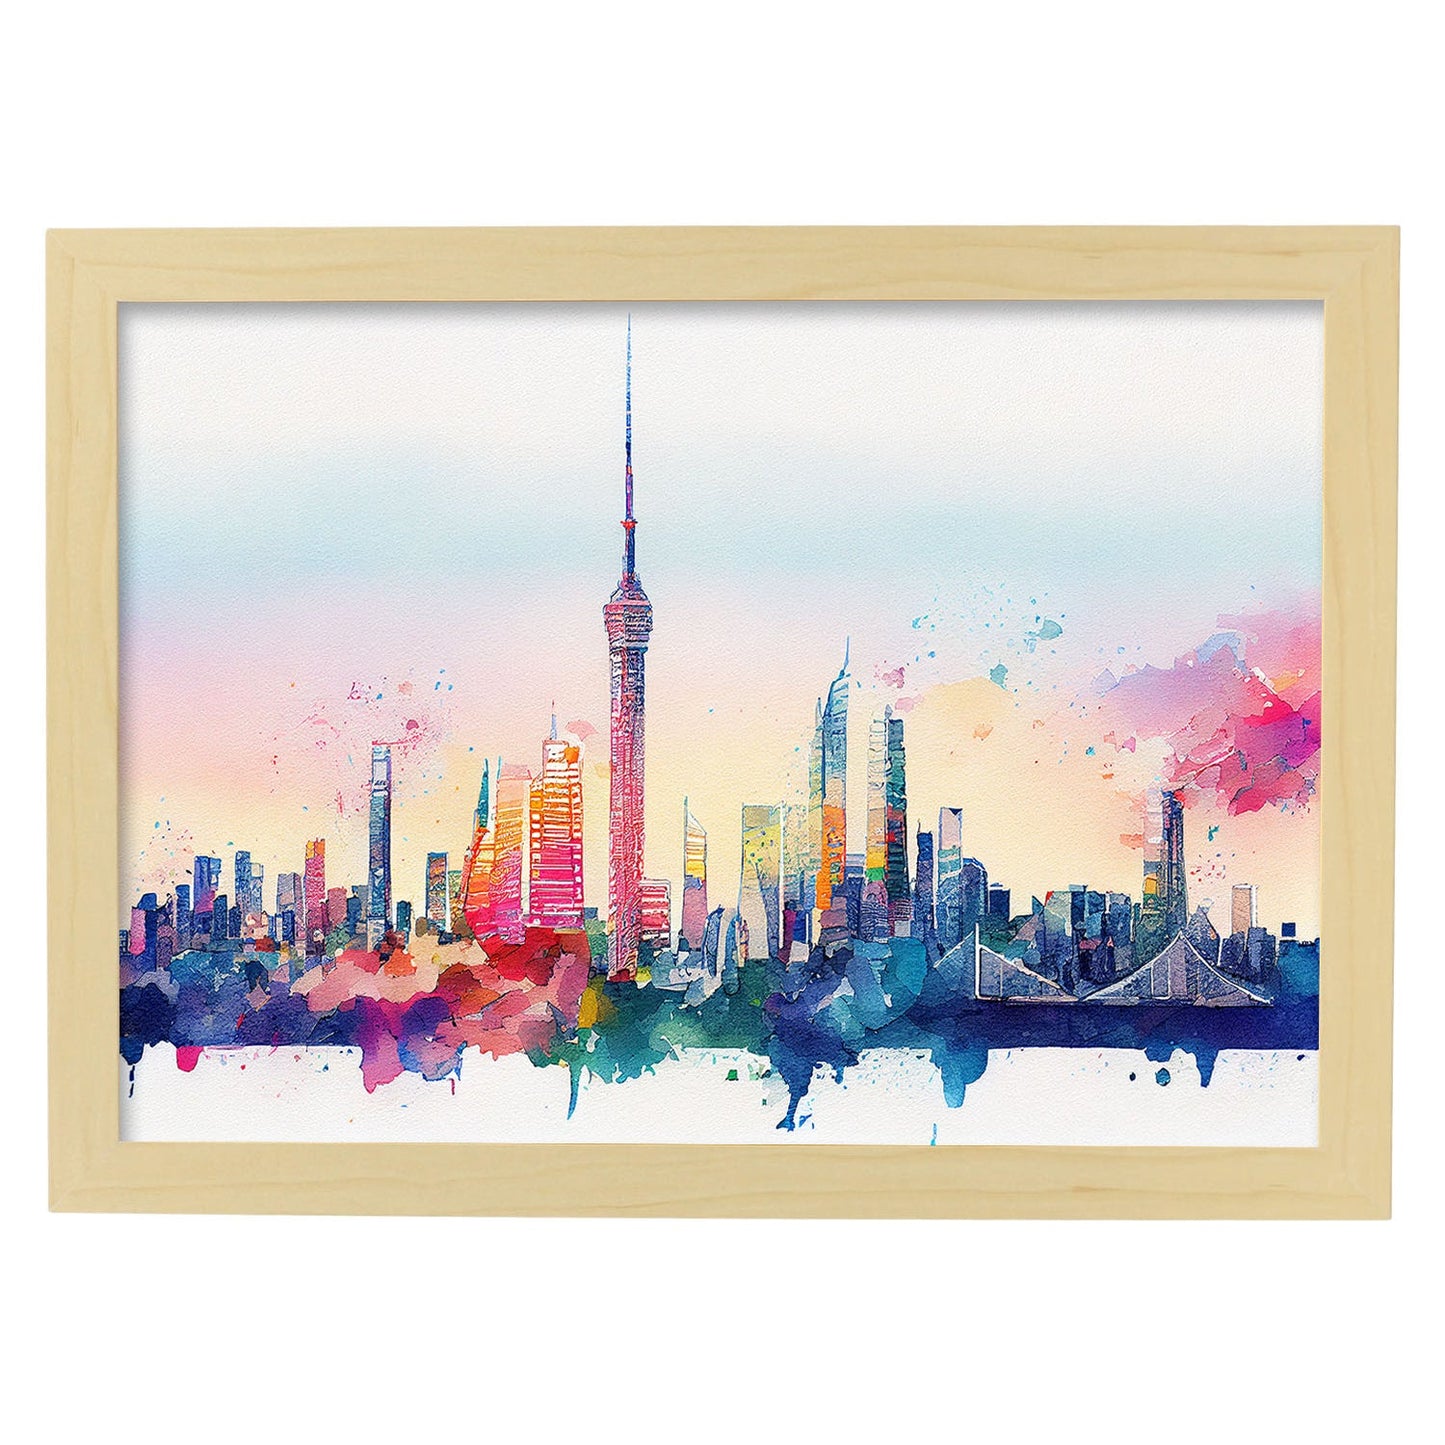 Nacnic watercolor of a skyline of the city of Tokyo_1. Aesthetic Wall Art Prints for Bedroom or Living Room Design.-Artwork-Nacnic-A4-Marco Madera Clara-Nacnic Estudio SL